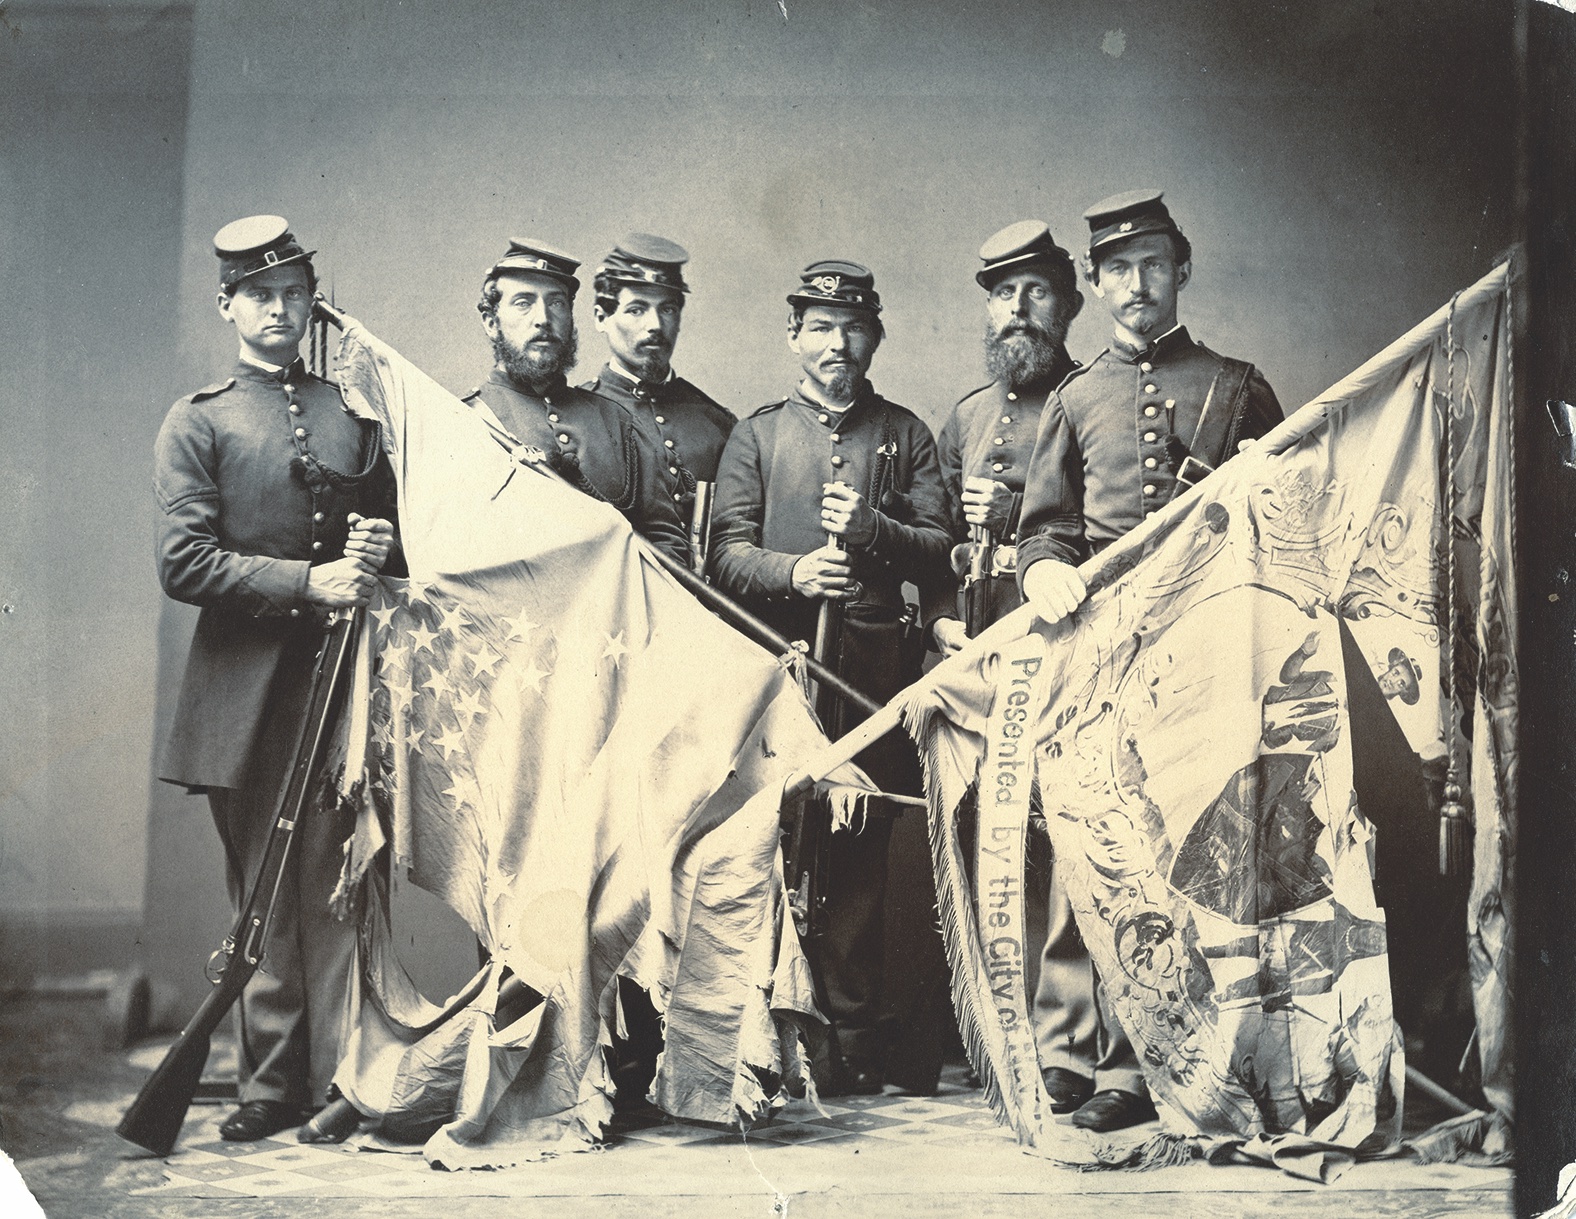 Veterans of the 20th New York color guard with their battle-shredded banners, including the state flag presented by the â€œCity of New York.â€ The 20th was primarily composed of German immigrants from New York City and New Jersey who belonged to Turnverein, or German gymnastic clubs. Members of such clubs were known as Turners, and the regiment was nicknamed the â€œTurner Regiment.â€ The sprightly soldiers put on occasional gymnastic shows in camp. The 20th served from May 1861 to June 1863. Aside from Antietam, the regimentâ€™s other major fight came at the May 1863 Battle of Salem Church during the Chancellorsville Campaign. (The Buffalo History Museum)